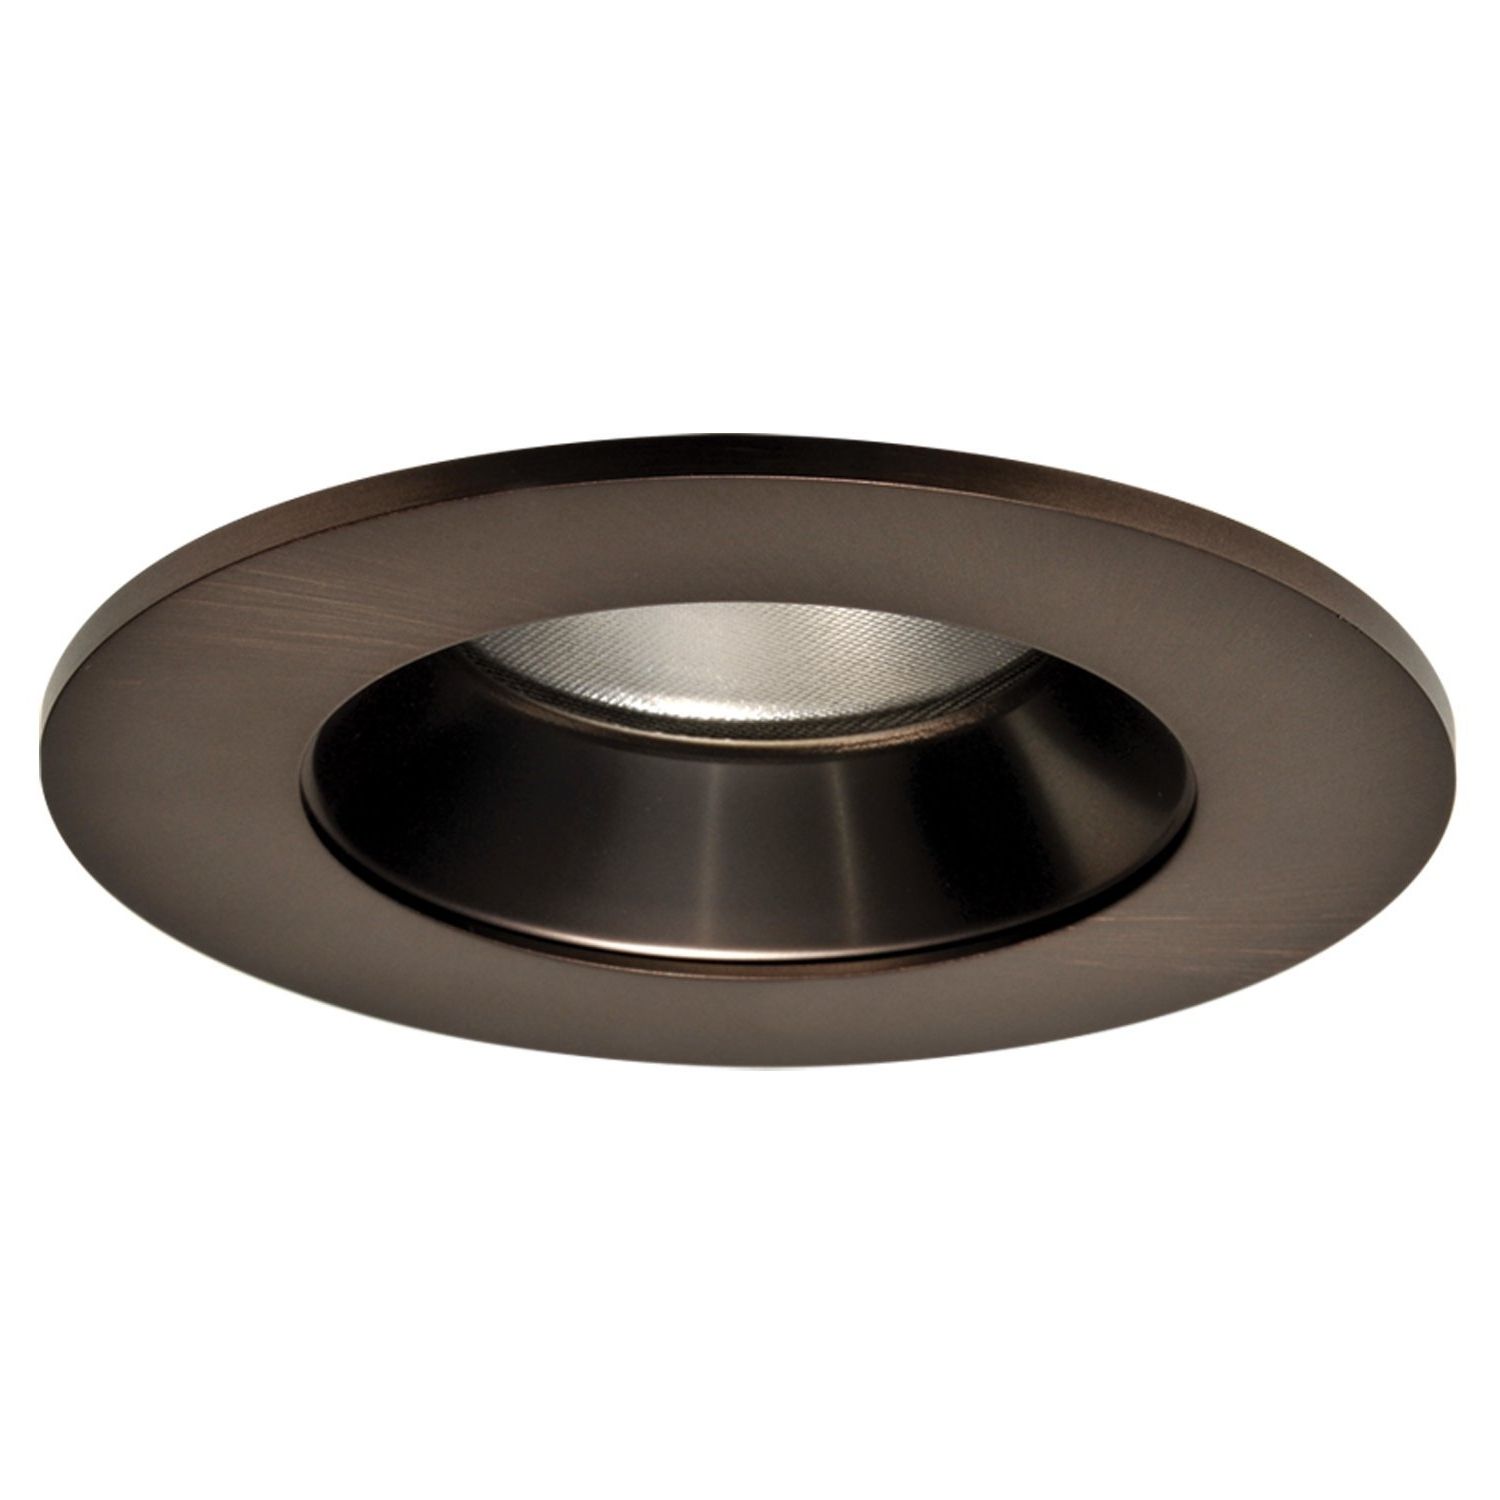 Latest Outdoor Recessed Ceiling Lighting Fixtures Regarding Lighting : Recessed Wall Light Fixture Led Linear Outdoor Step Simes (View 4 of 20)